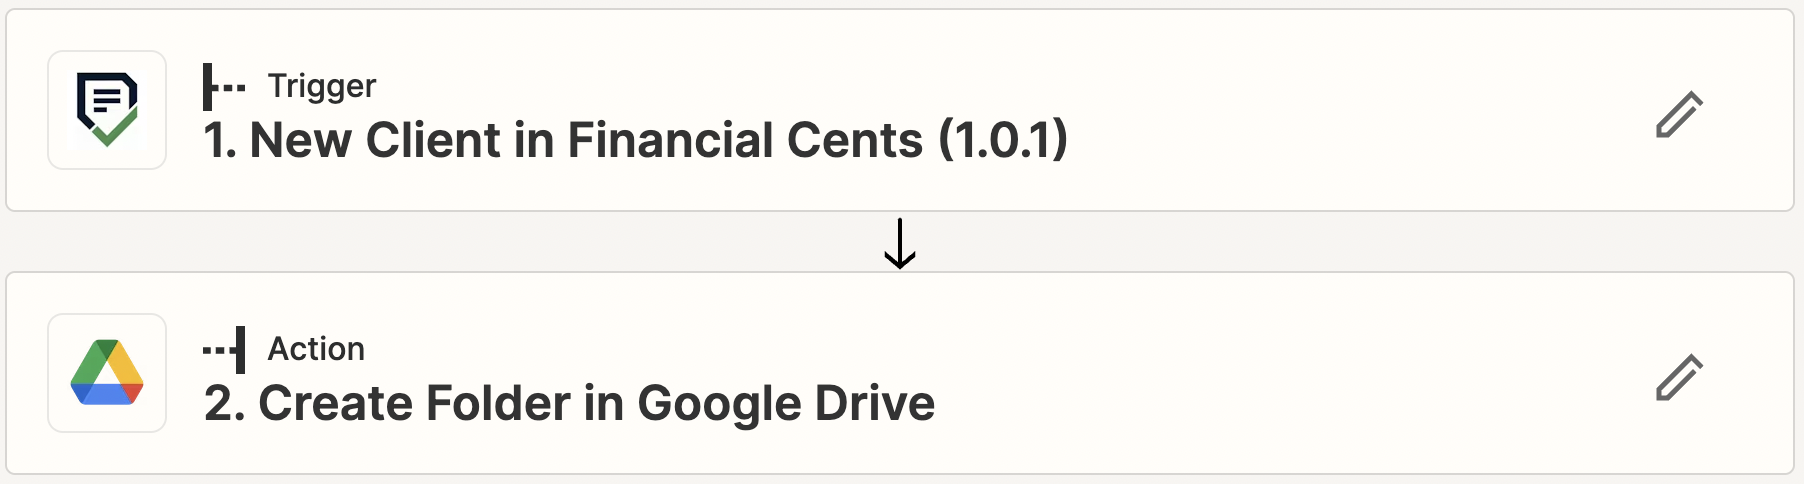 Financial cents and Google drive integration step 1